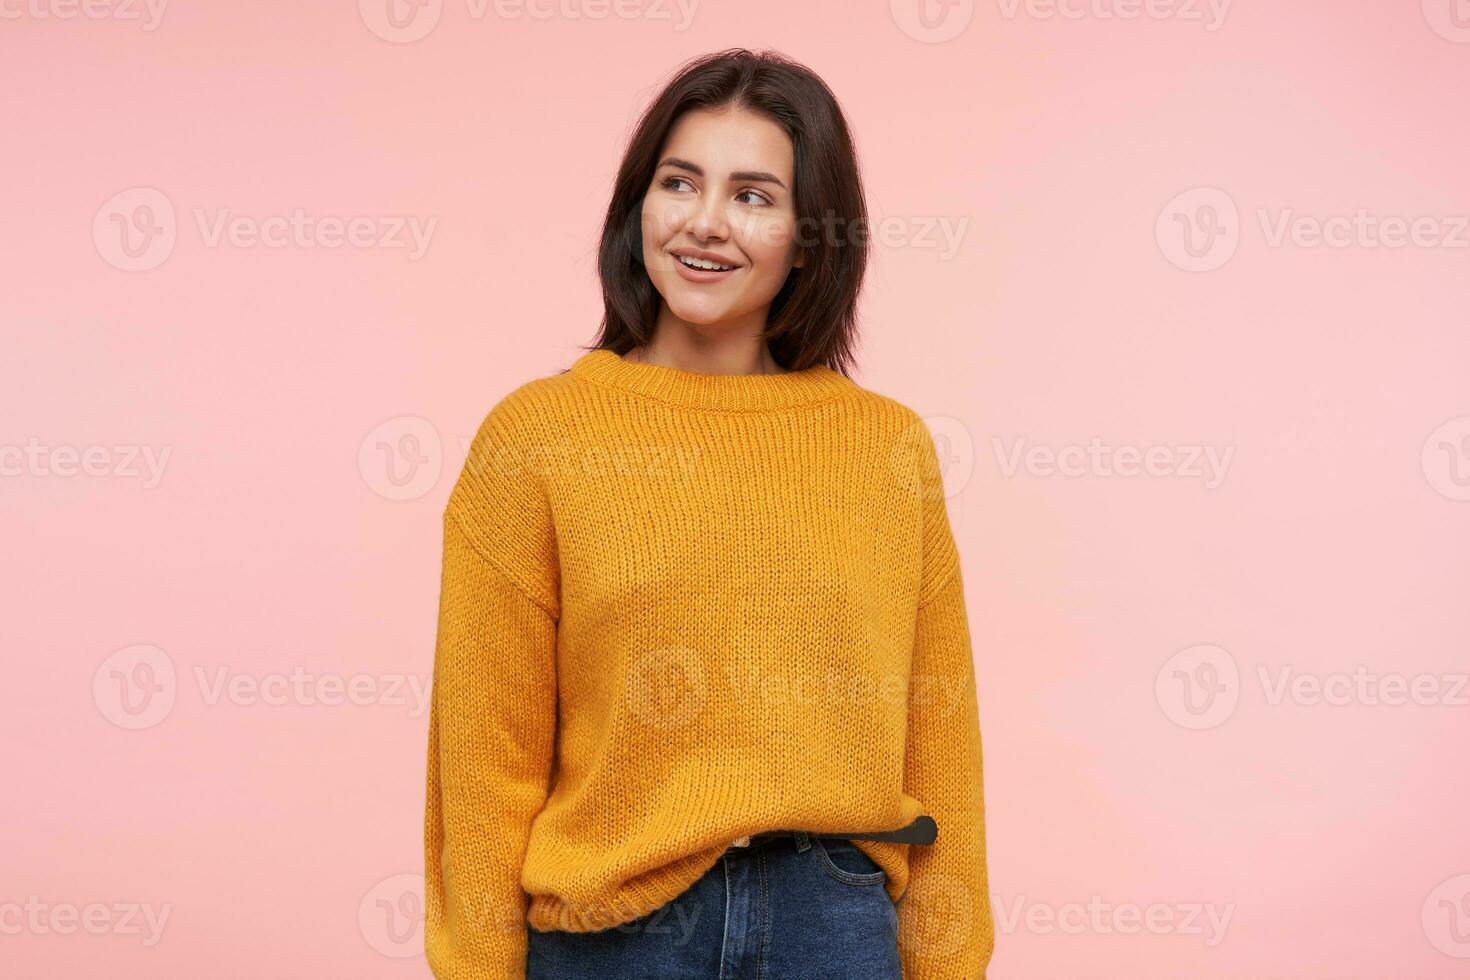 Cheerful young attractive brown haired woman with casual hairstyle smiling pleasantly and keeping hands along body while standing over pink background photo